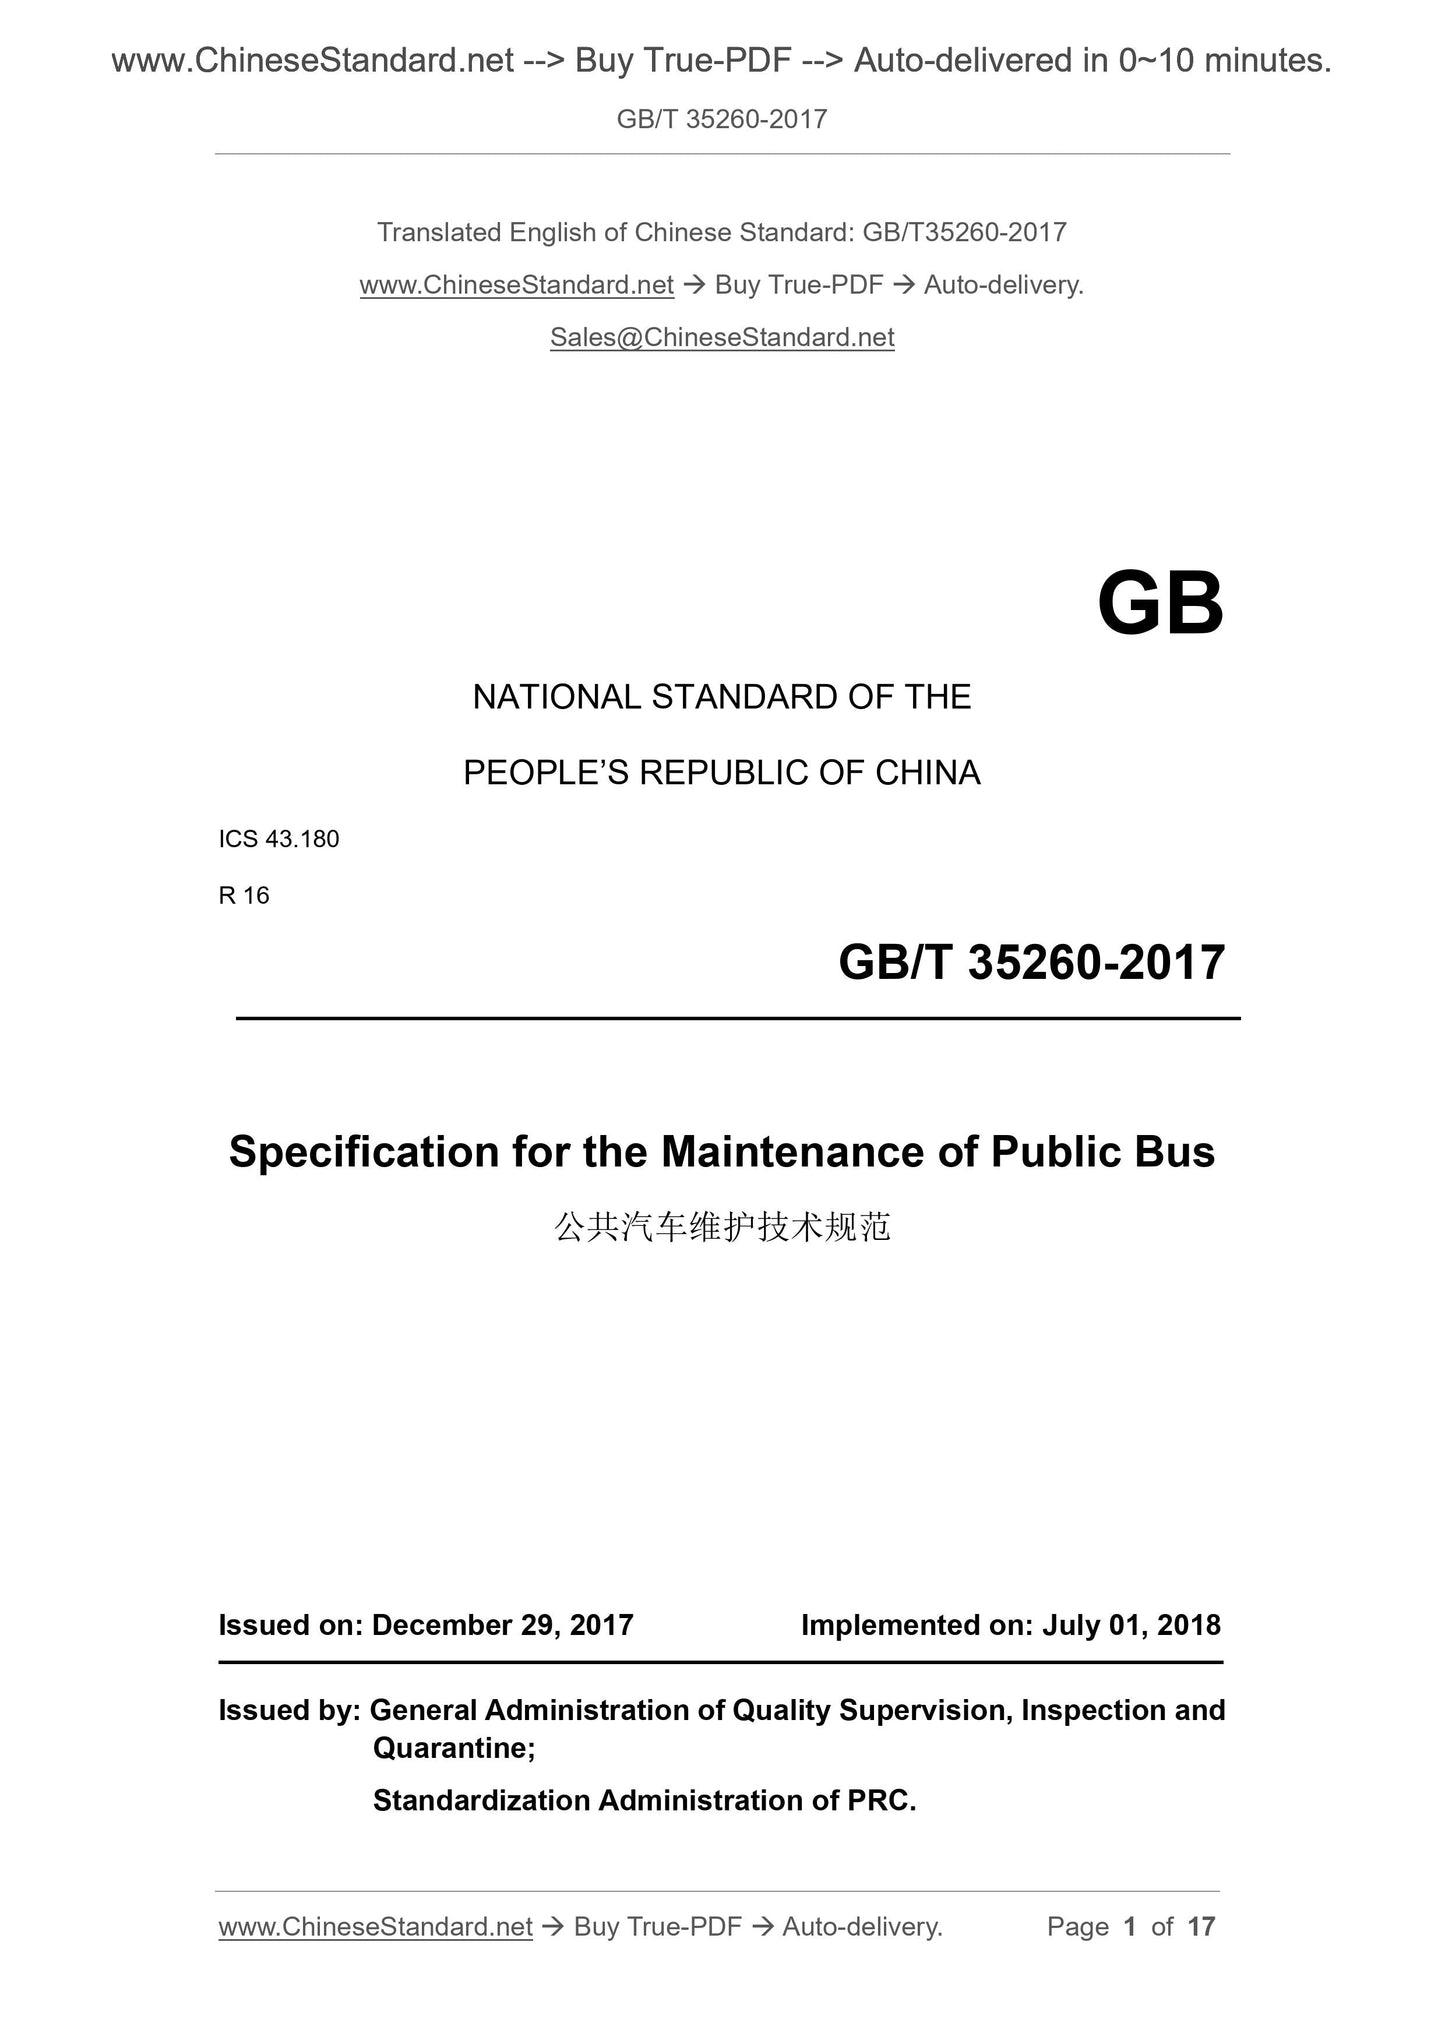 GB/T 35260-2017 Page 1